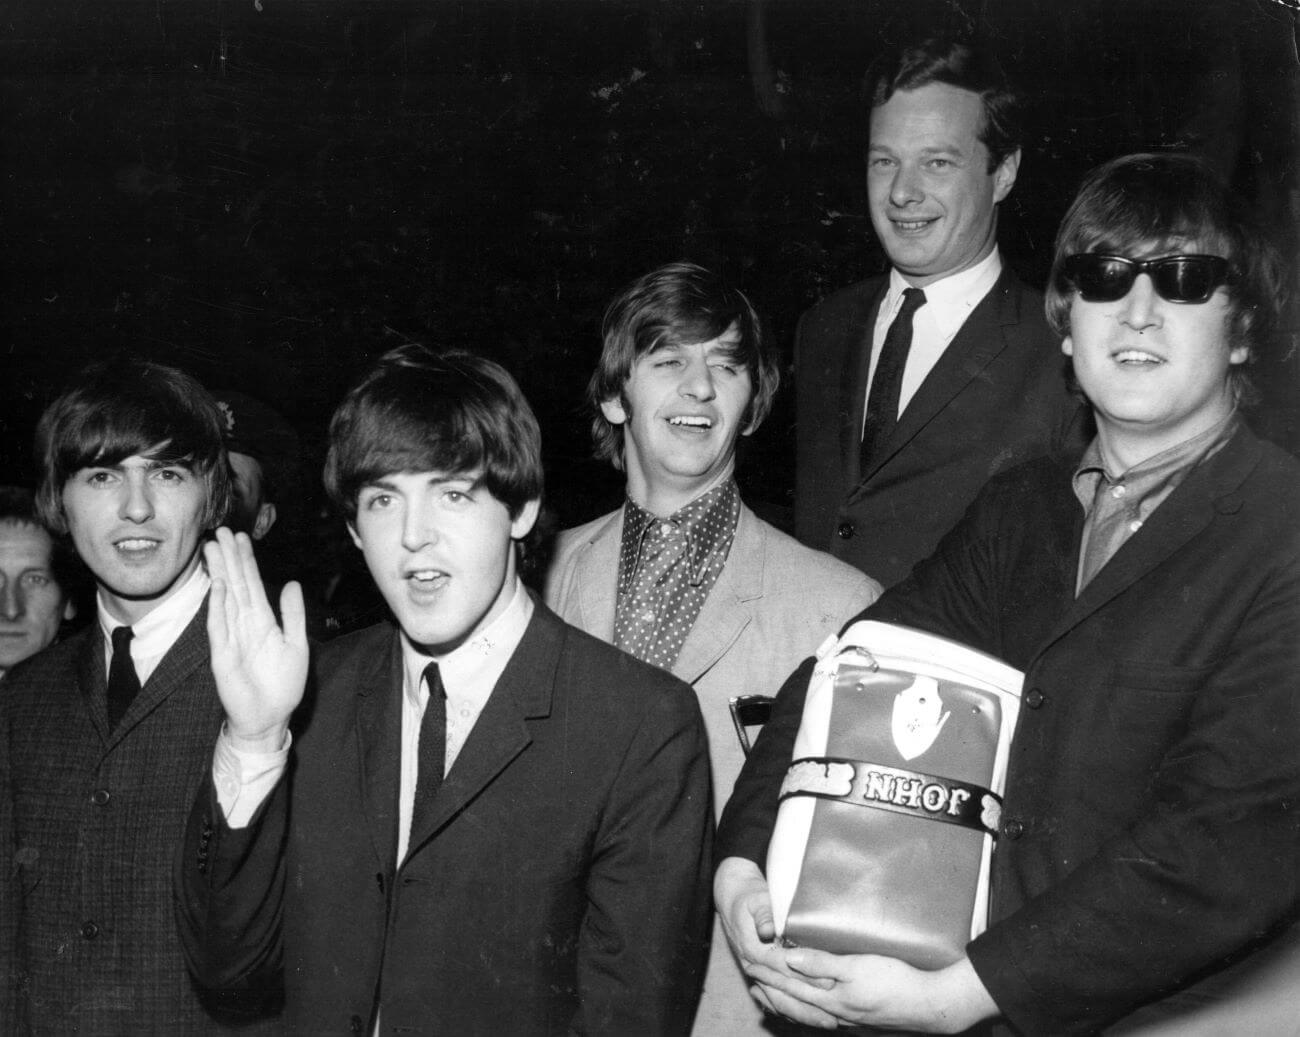 A black and white picture of George Harrison, Paul McCartney, Ringo Starr, Brian Epstein, and John Lennon walking. Lennon wears sunglasses and holds a bag.